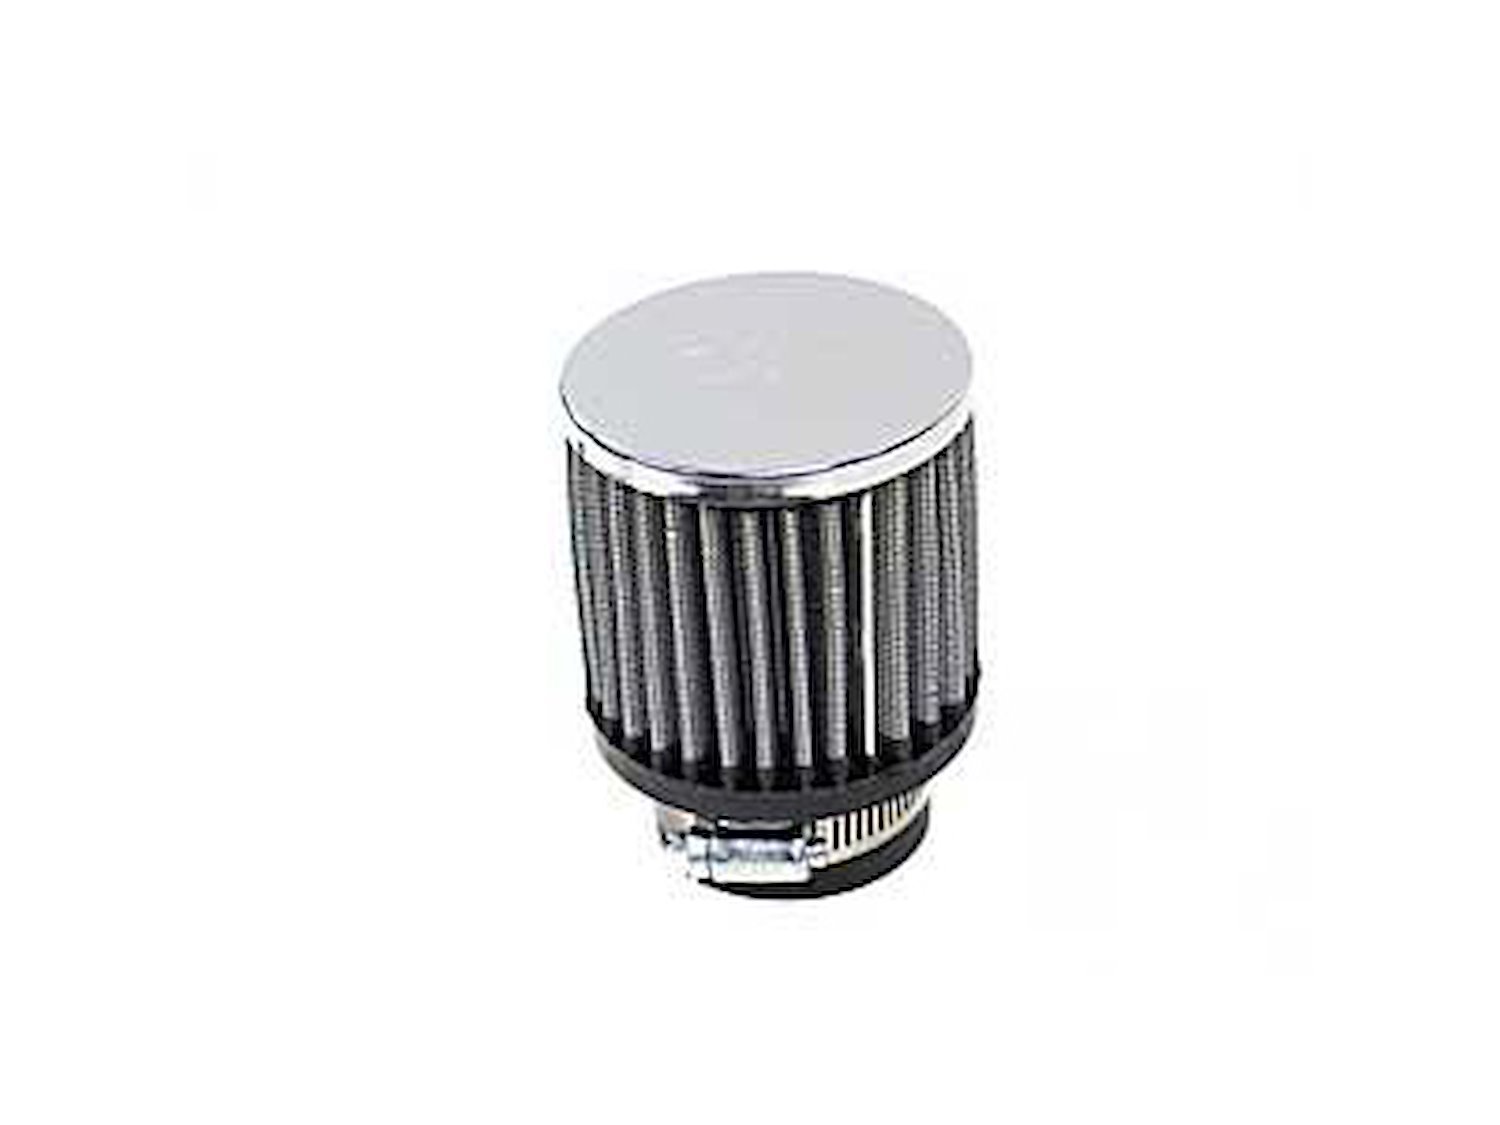 Round Straight Air Filter Flange Dia. (F): 1.813" (46 mm)